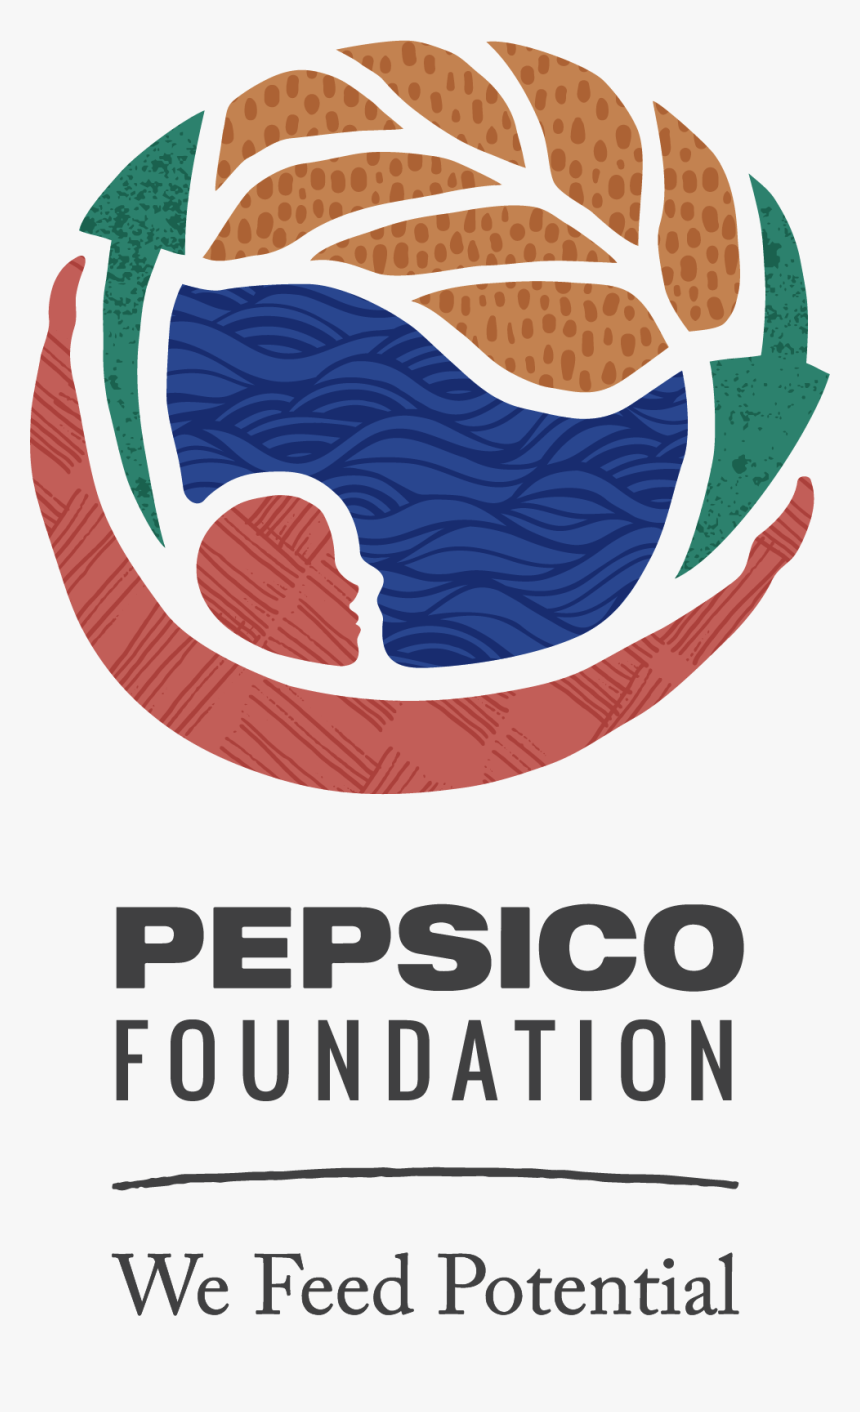 Pepsico Logo High Res Photos Download Jpg Png Gif Raw Tiff Psd Pdf And Watch Online - roblox logo png download 900 400 free transparent roblox png download cleanpng kisspng